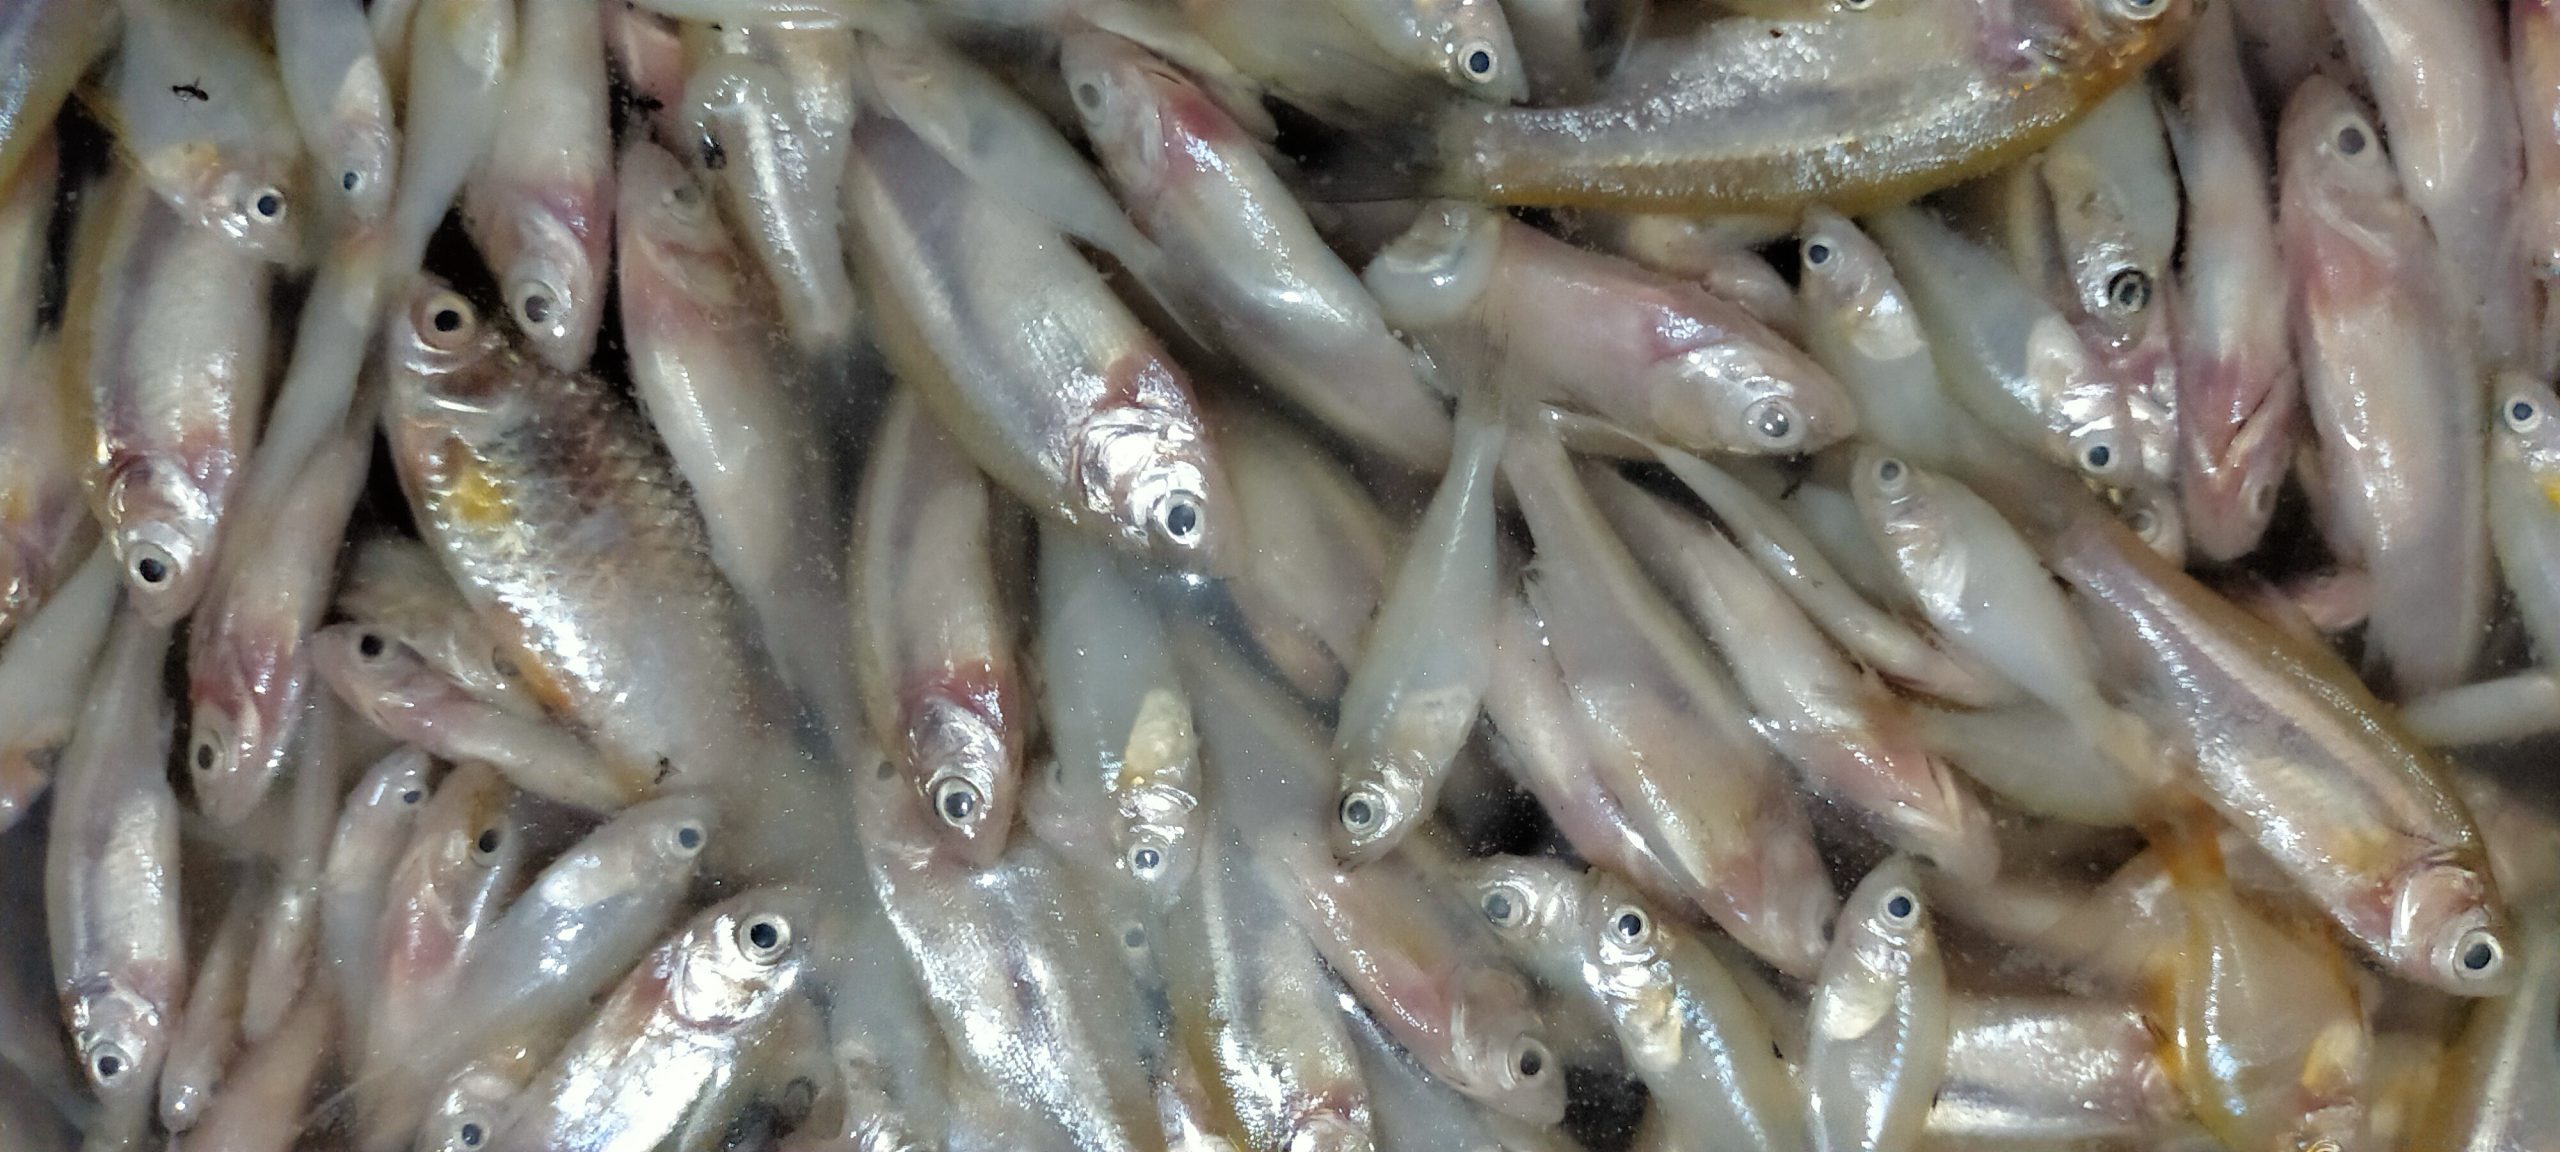 Fish in a Market